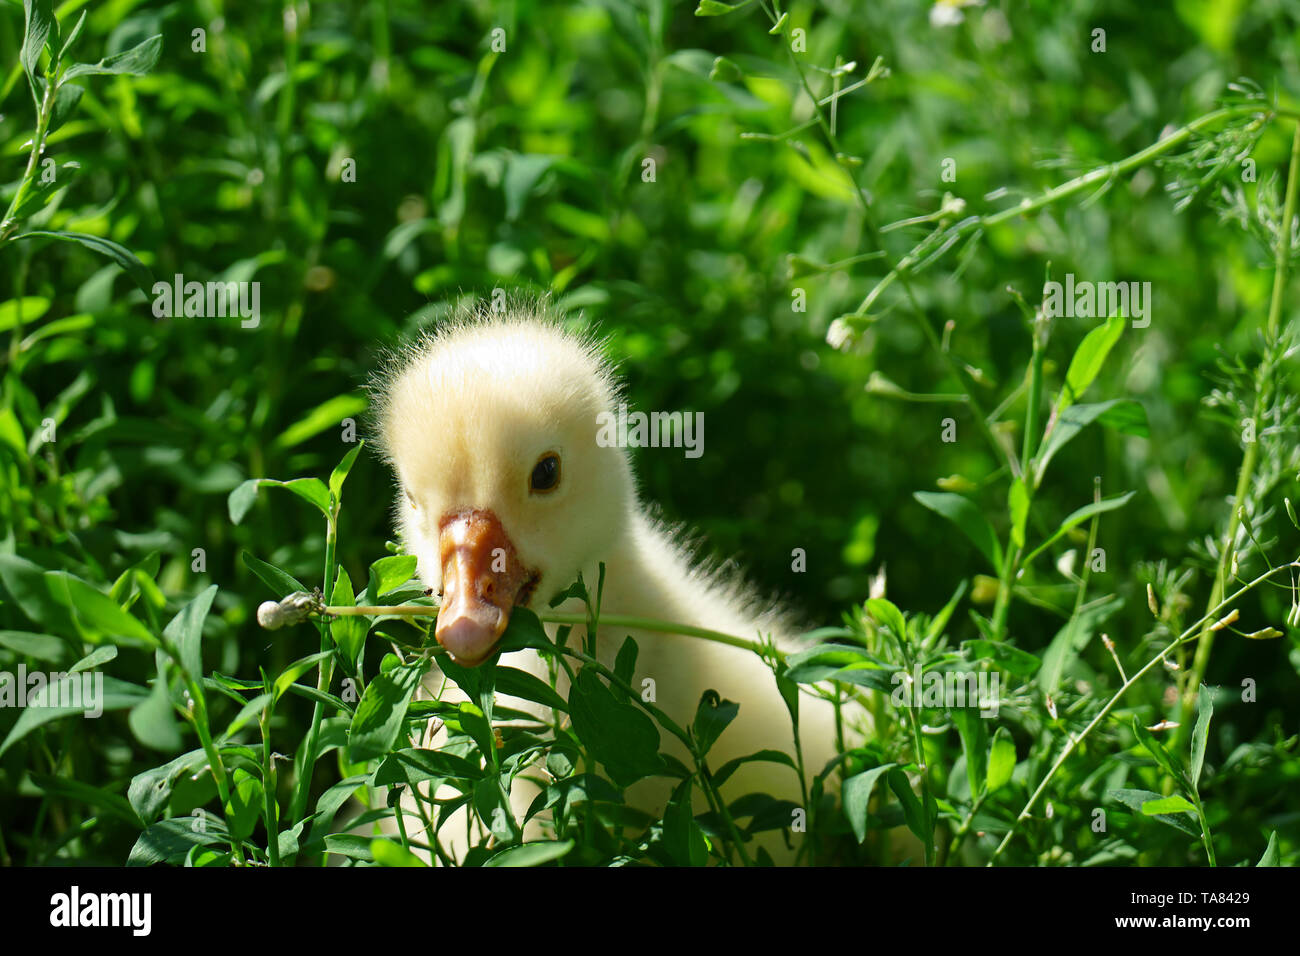 Baby goose eats green juicy grass on lawn. Copy space Stock Photo